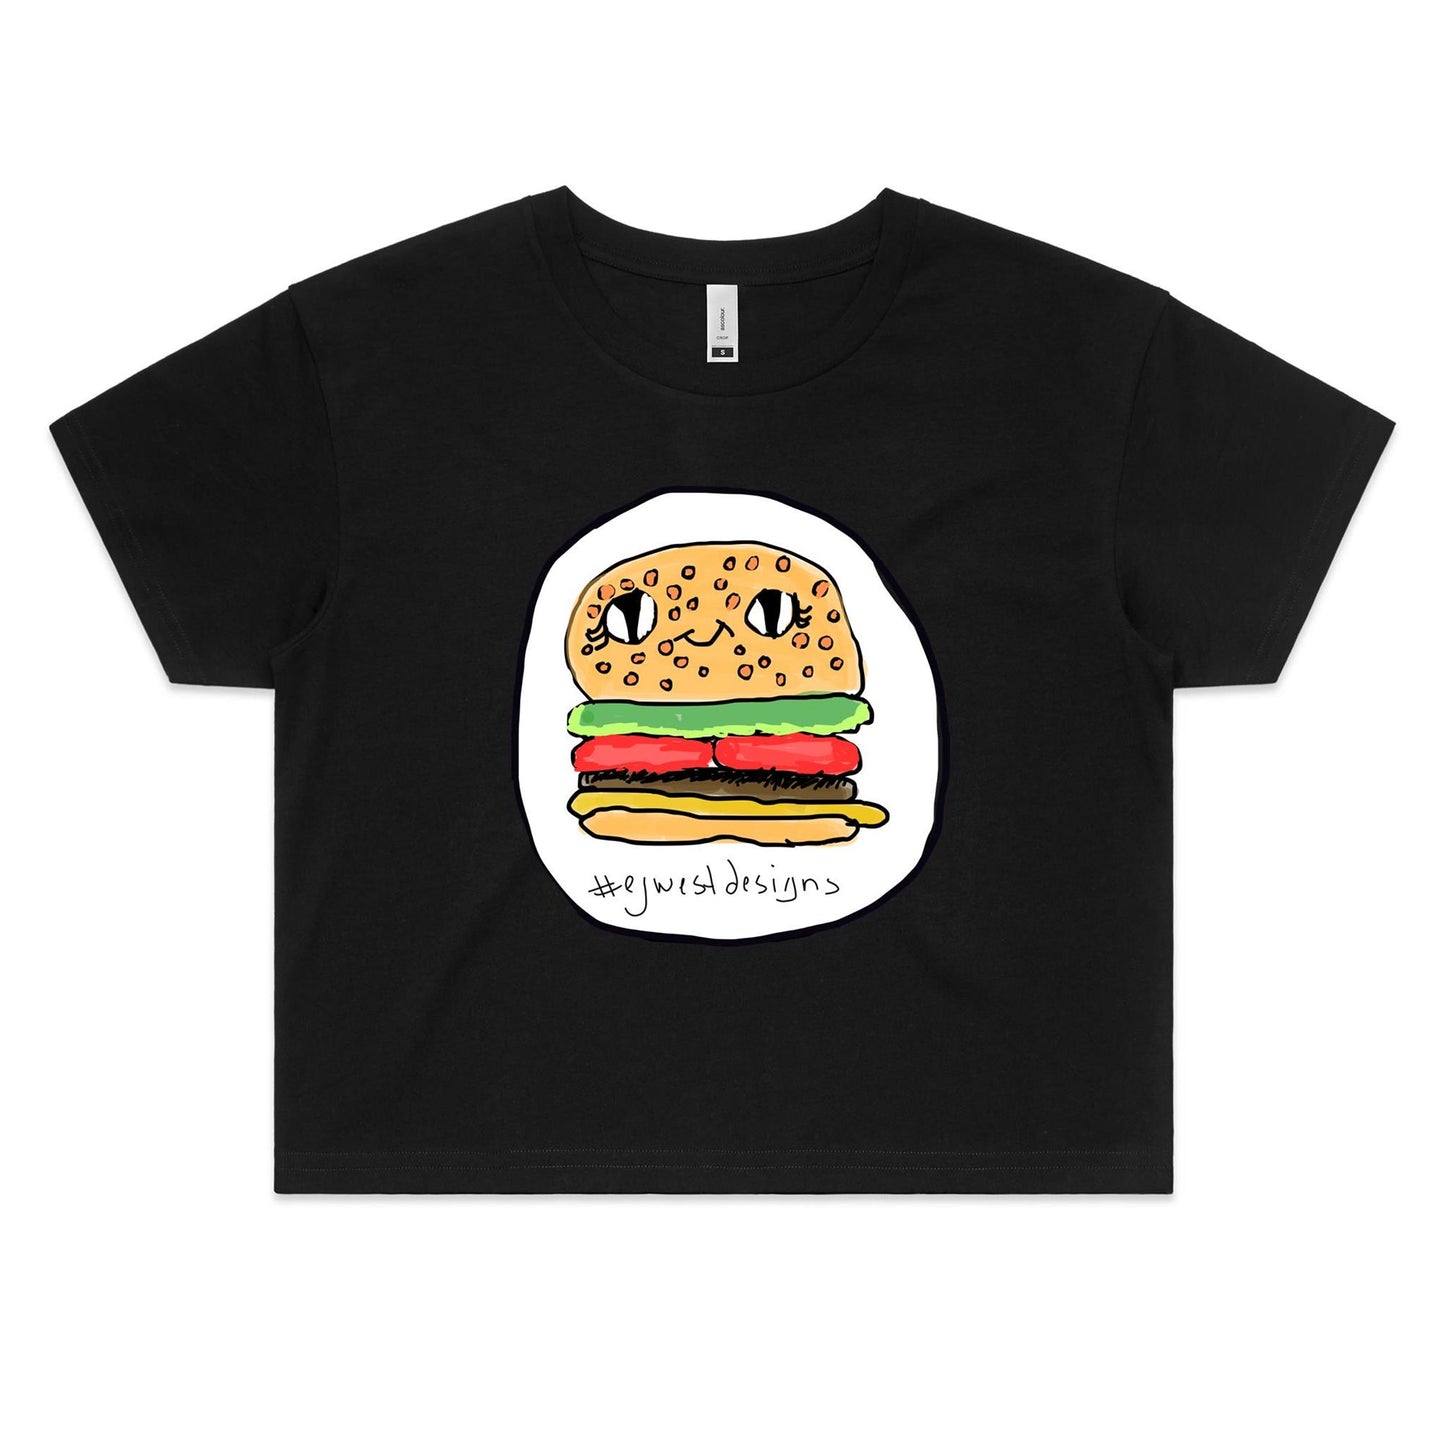 Women's Crop Tee - “Burger came to life” by EJWEST DESIGNS